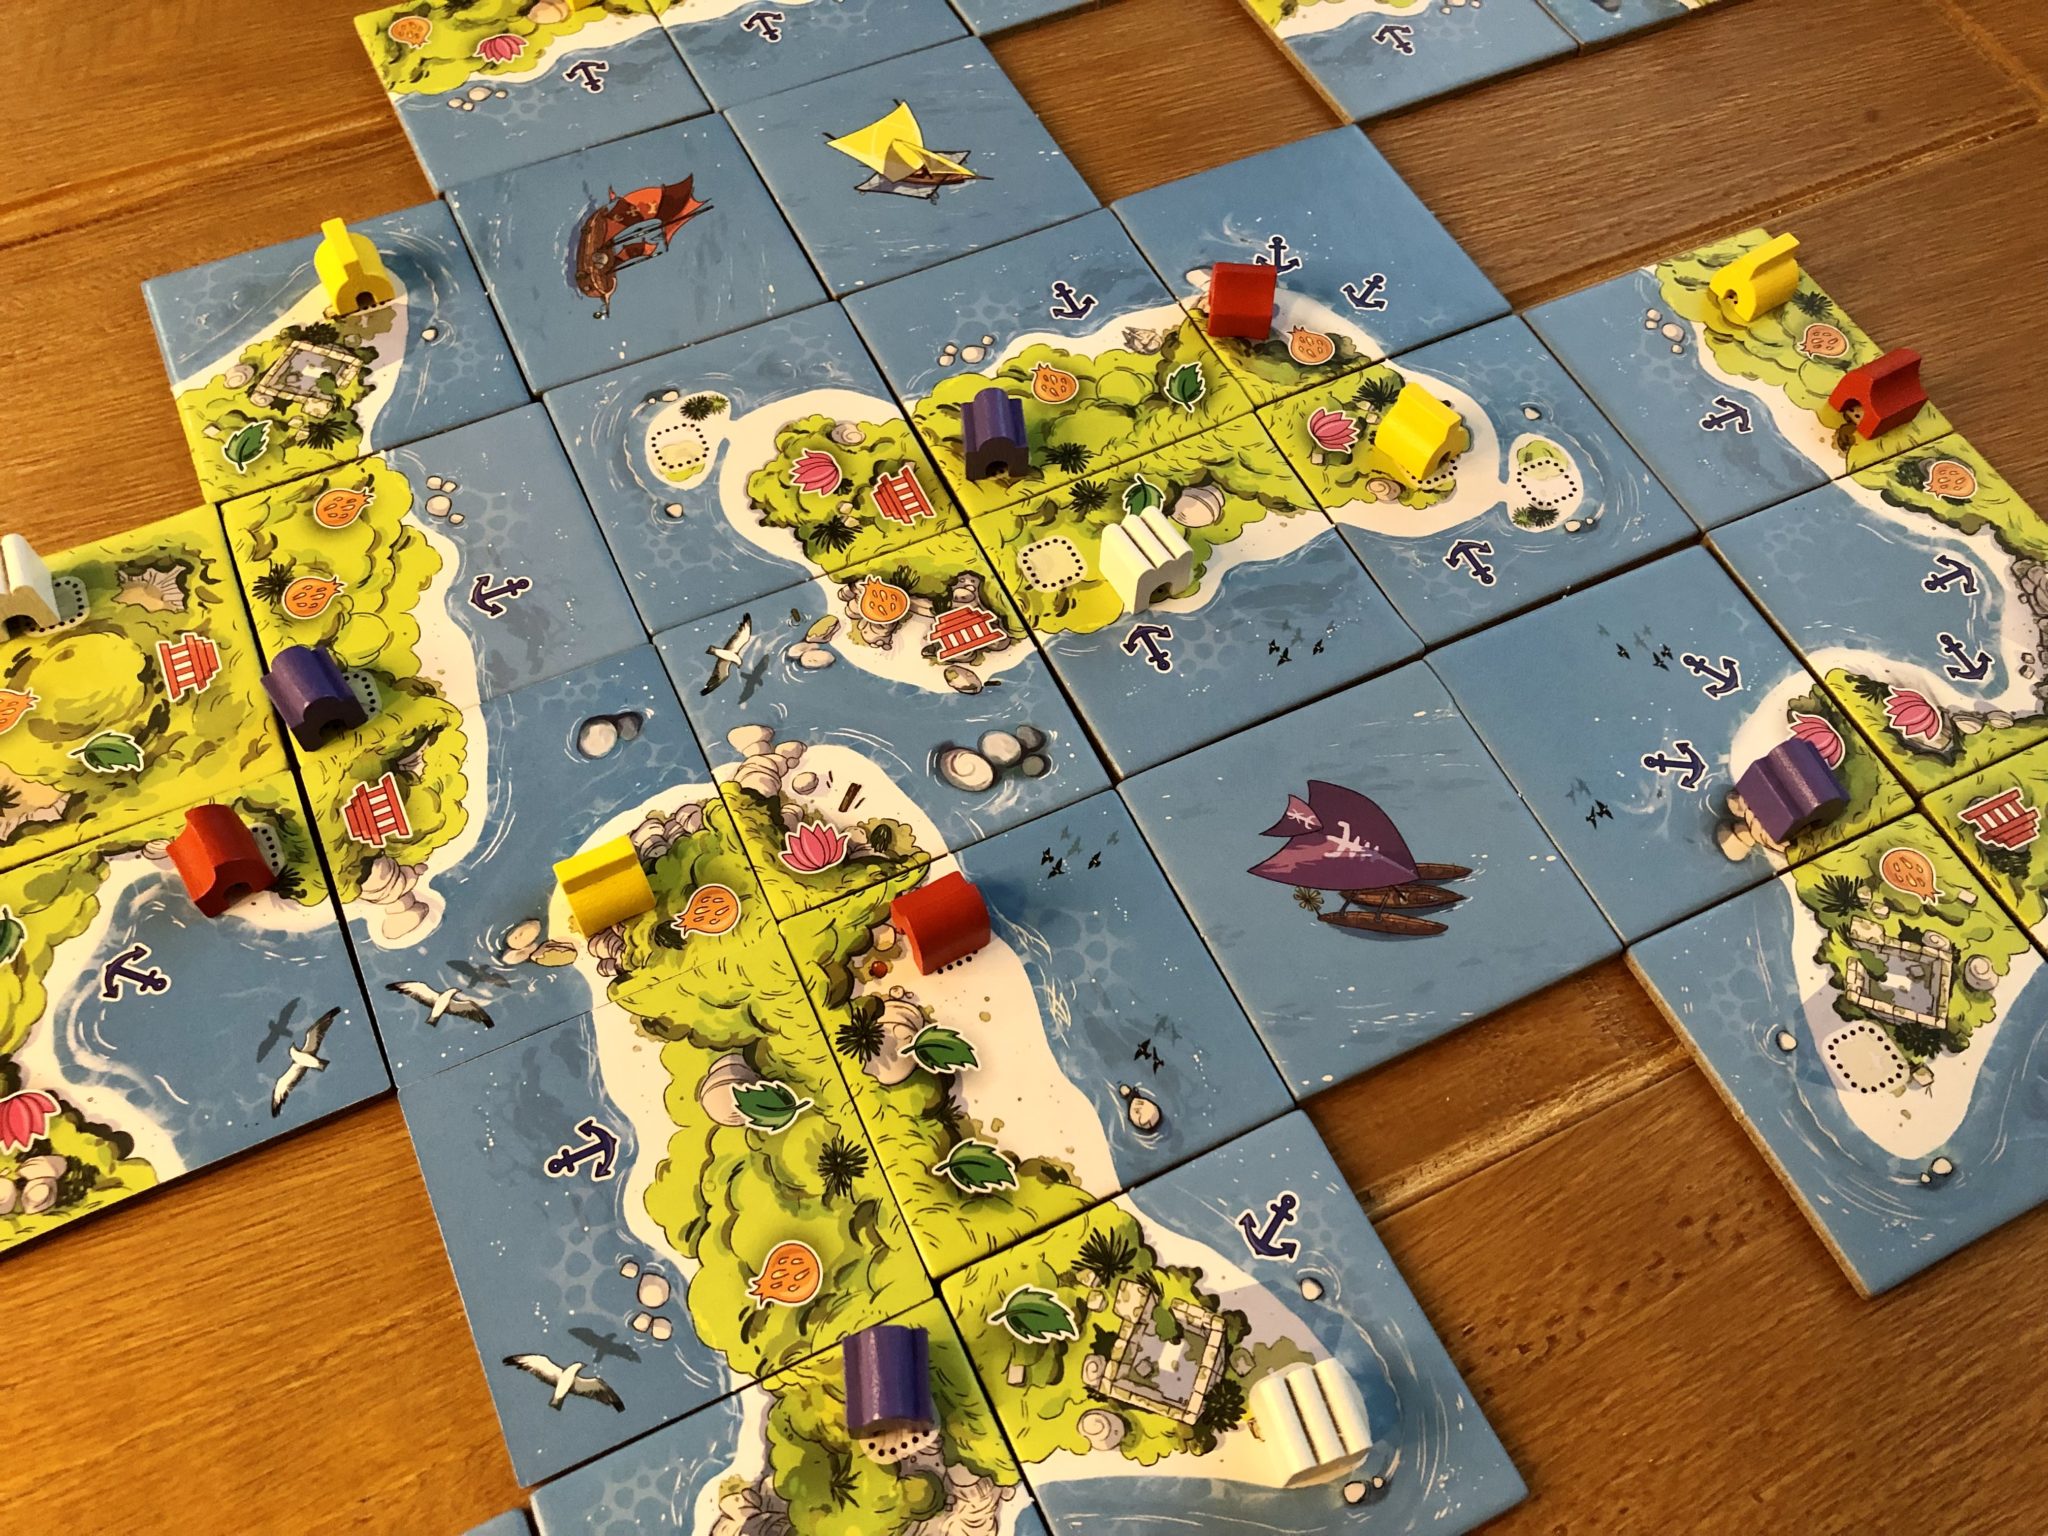 Small Islands board made with tiles